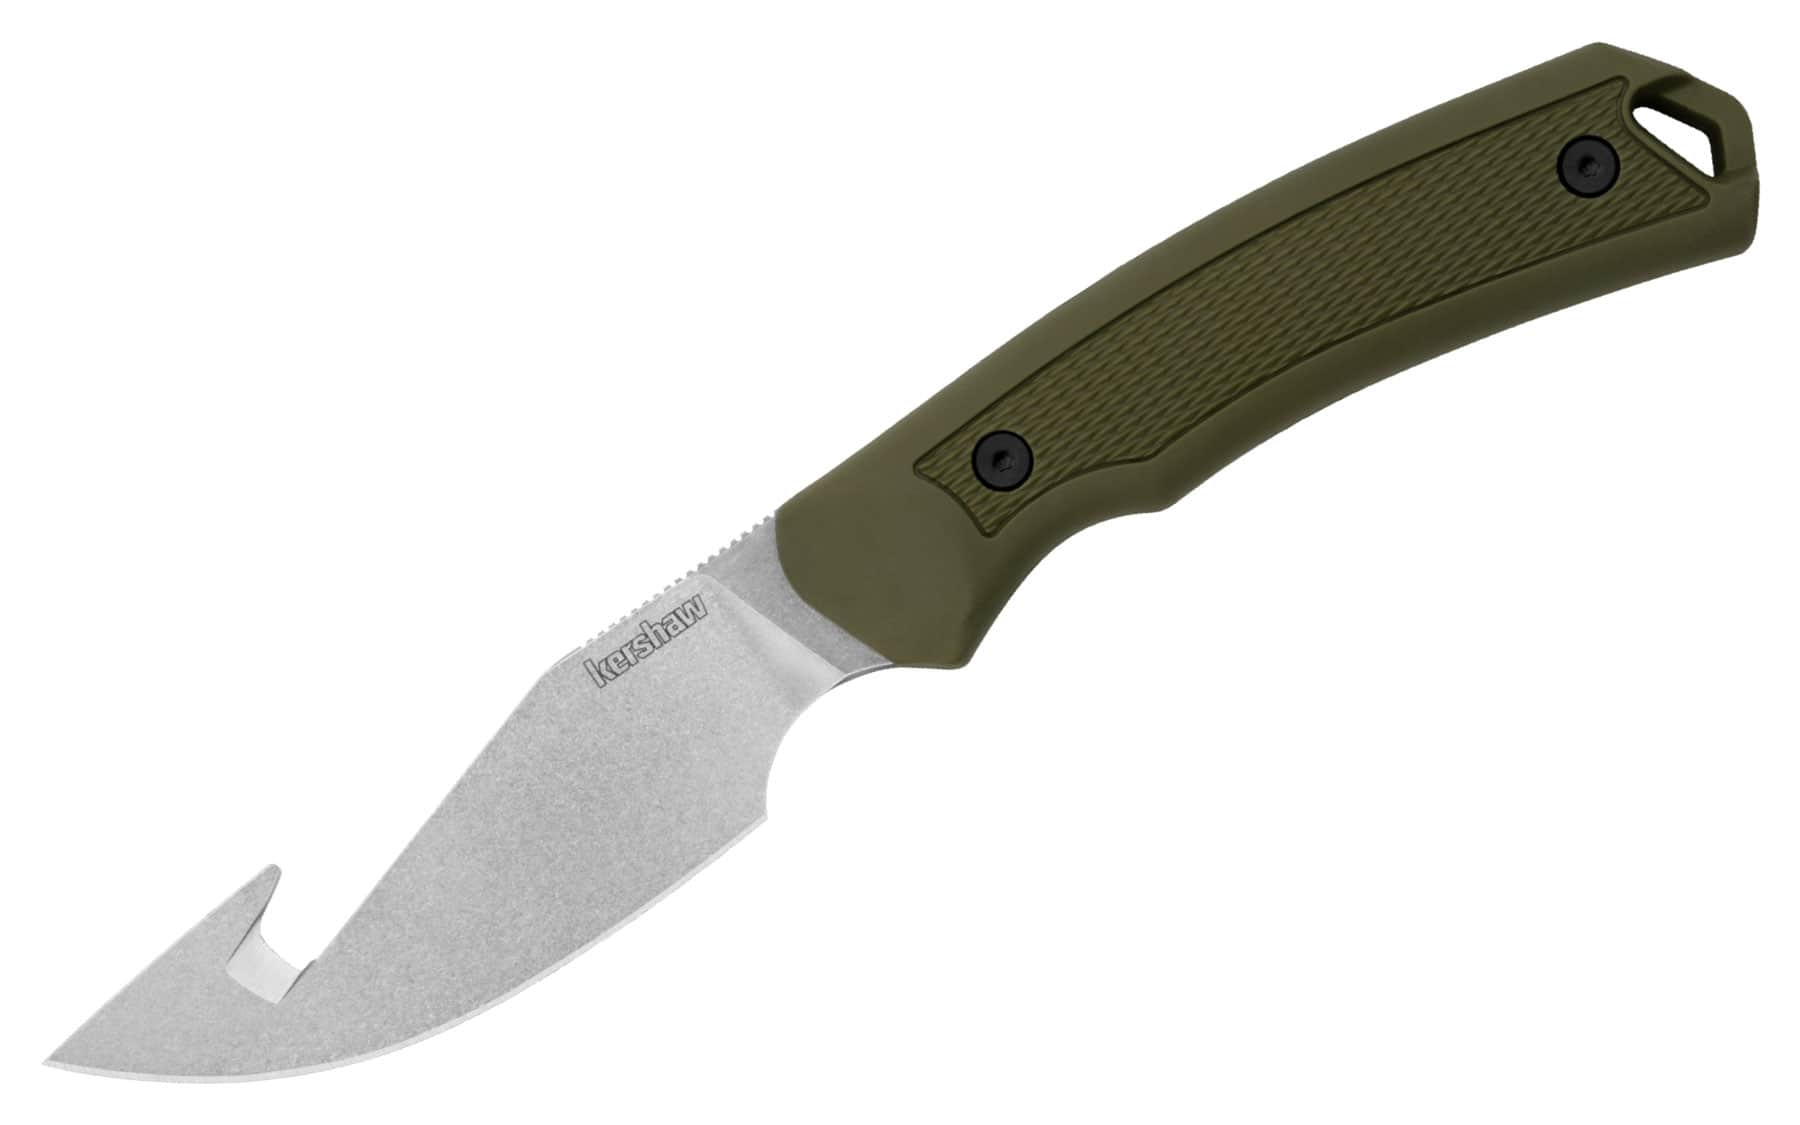 Kershaw released a new hunting knife. 